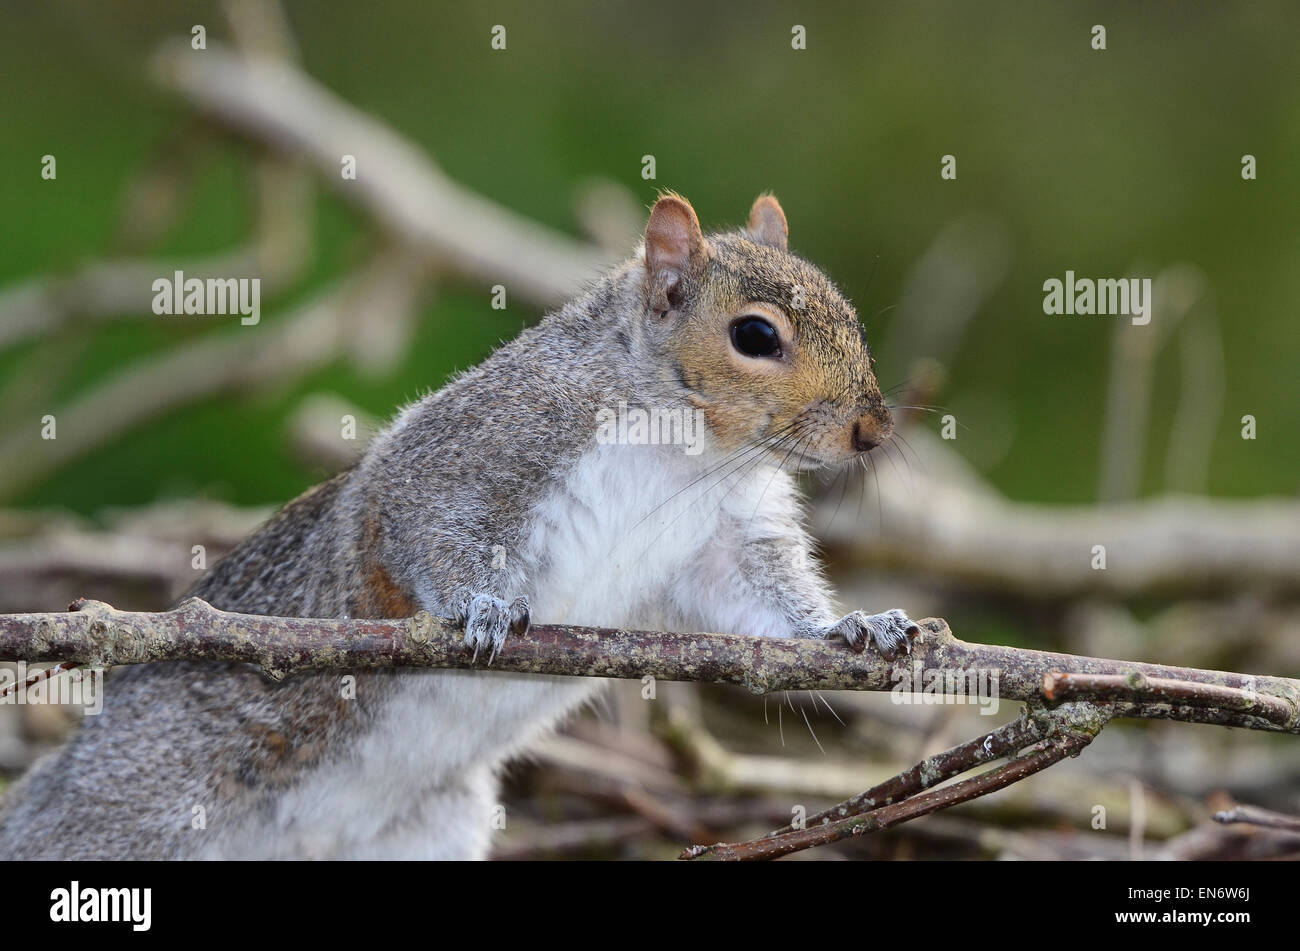 A grey squirrel on some twigs UK Stock Photo